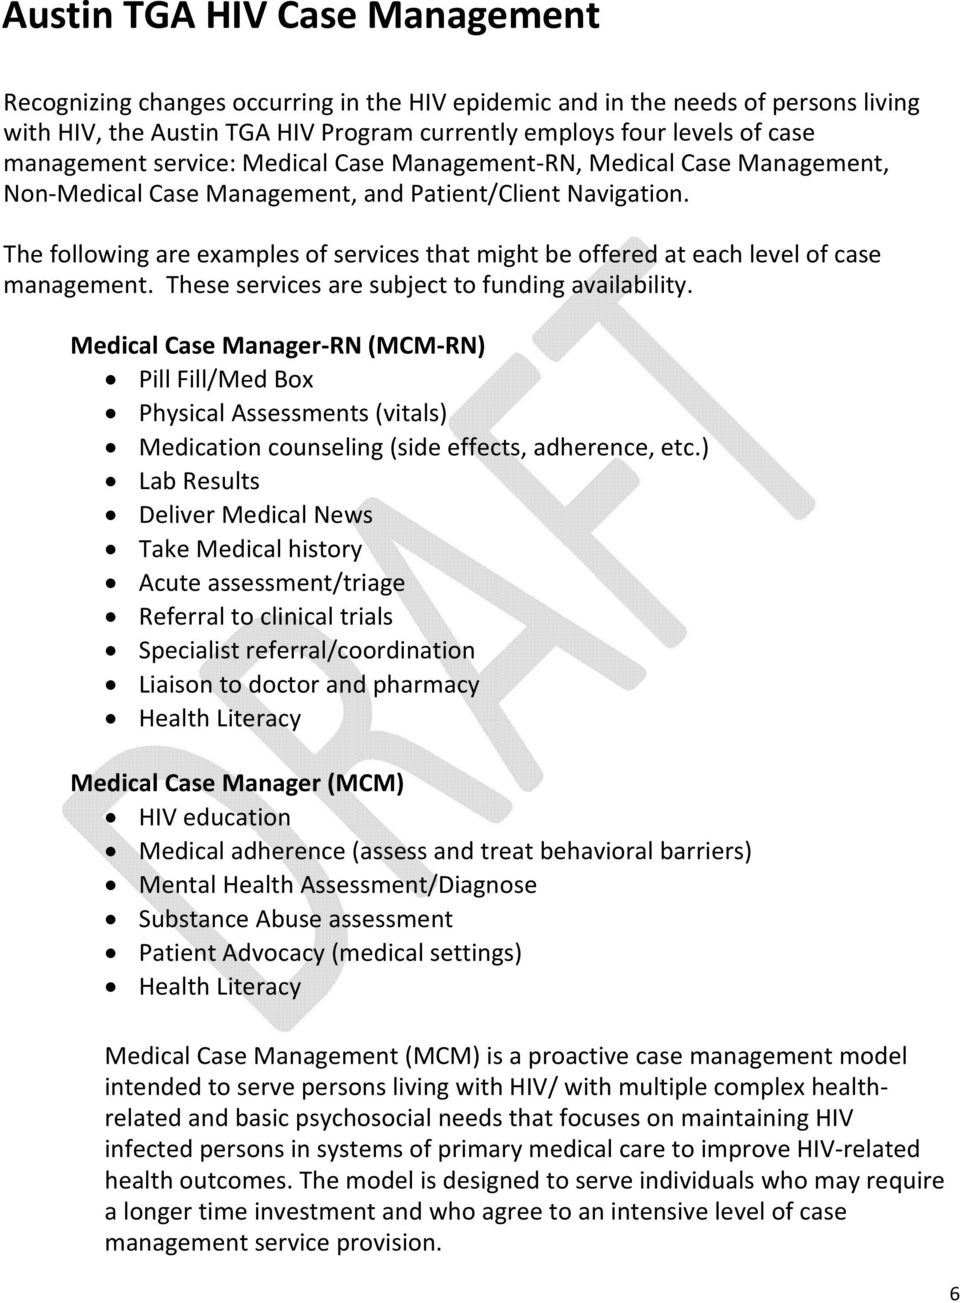 The following are examples of services that might be offered at each level of case management. These services are subject to funding availability.